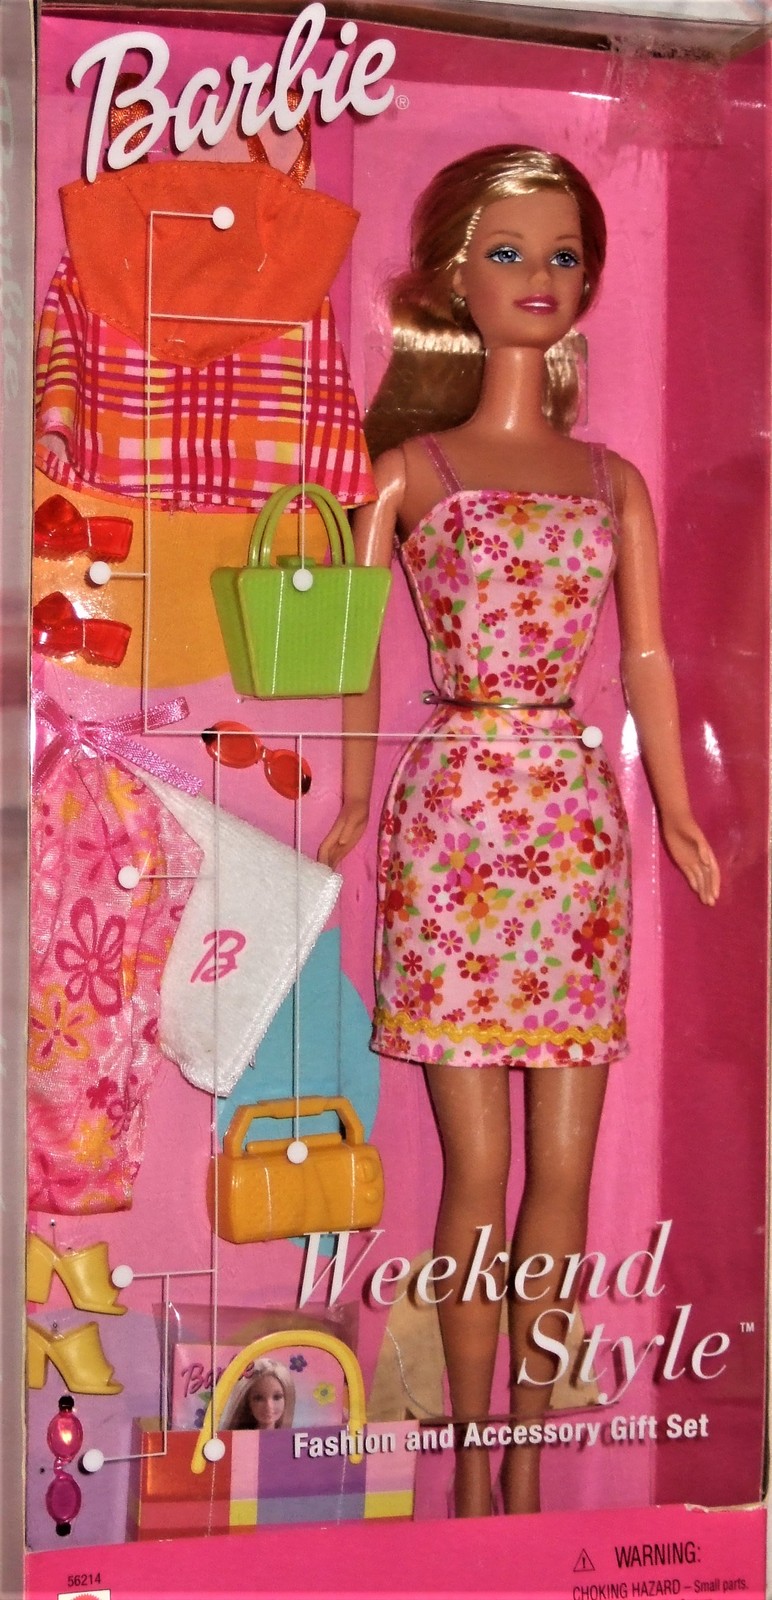 Barbie Weekend Style Fashion and Accessory and 50 similar items